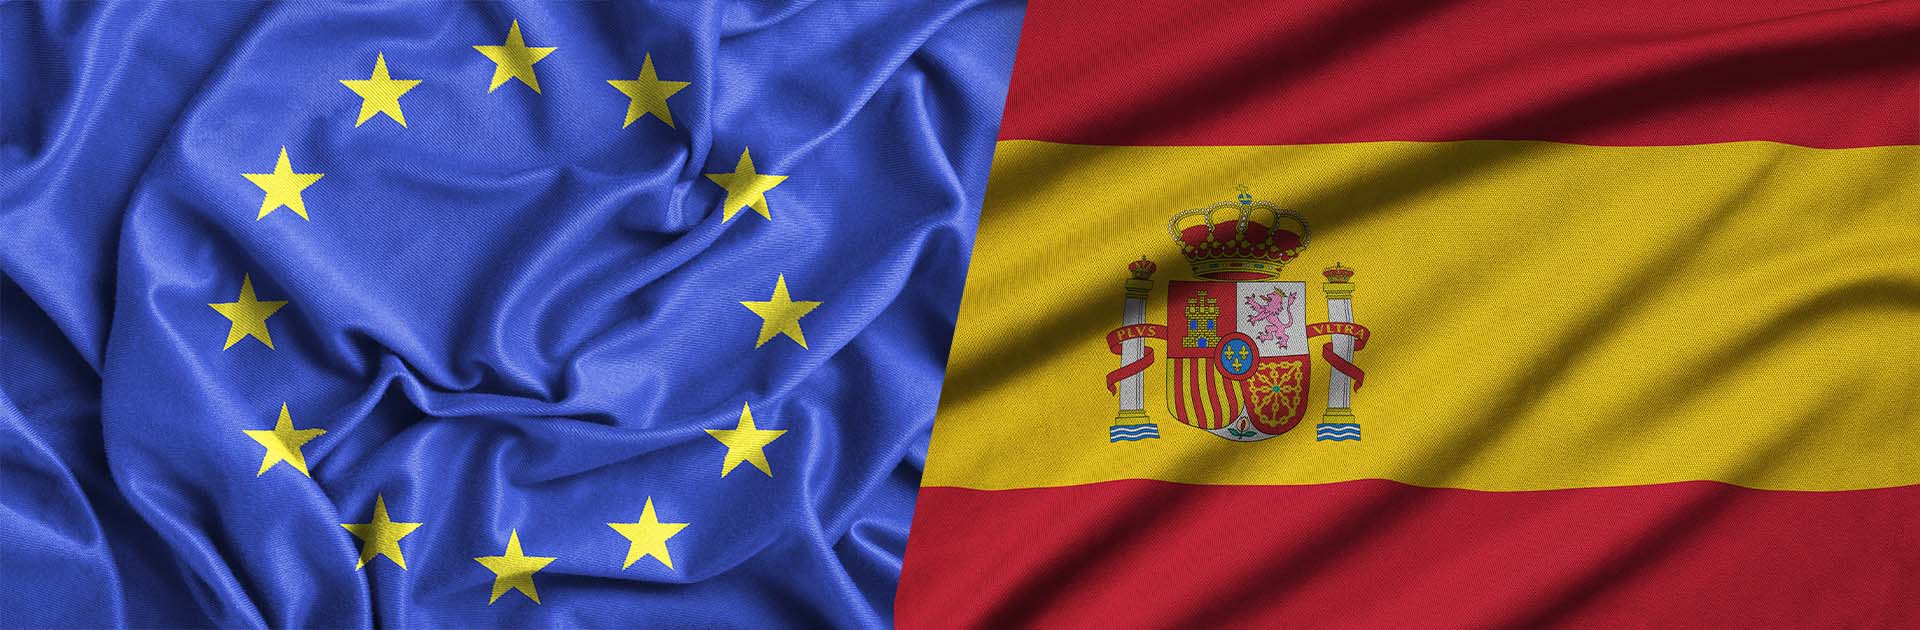 Spain’s presidency of the Council of the EU. Flags of the European Union and Spain